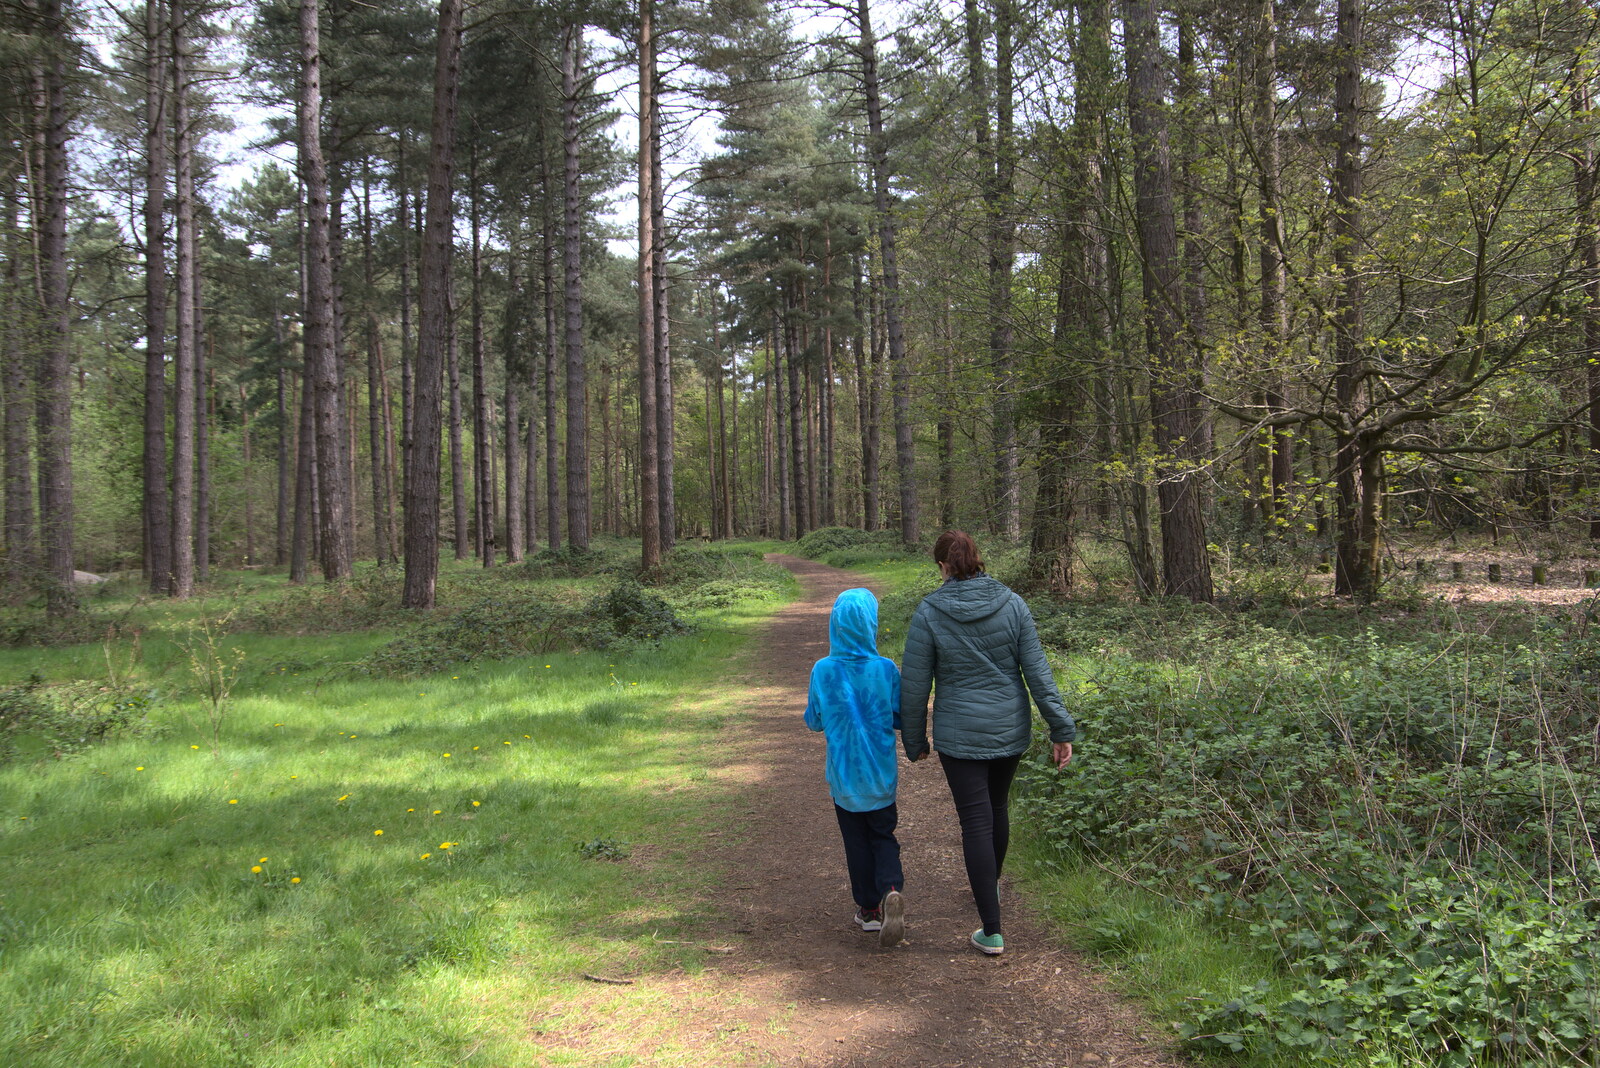 Harry and Isobel walk off through the woods from A Vaccination Afternoon, Swaffham, Norfolk - 9th May 2021